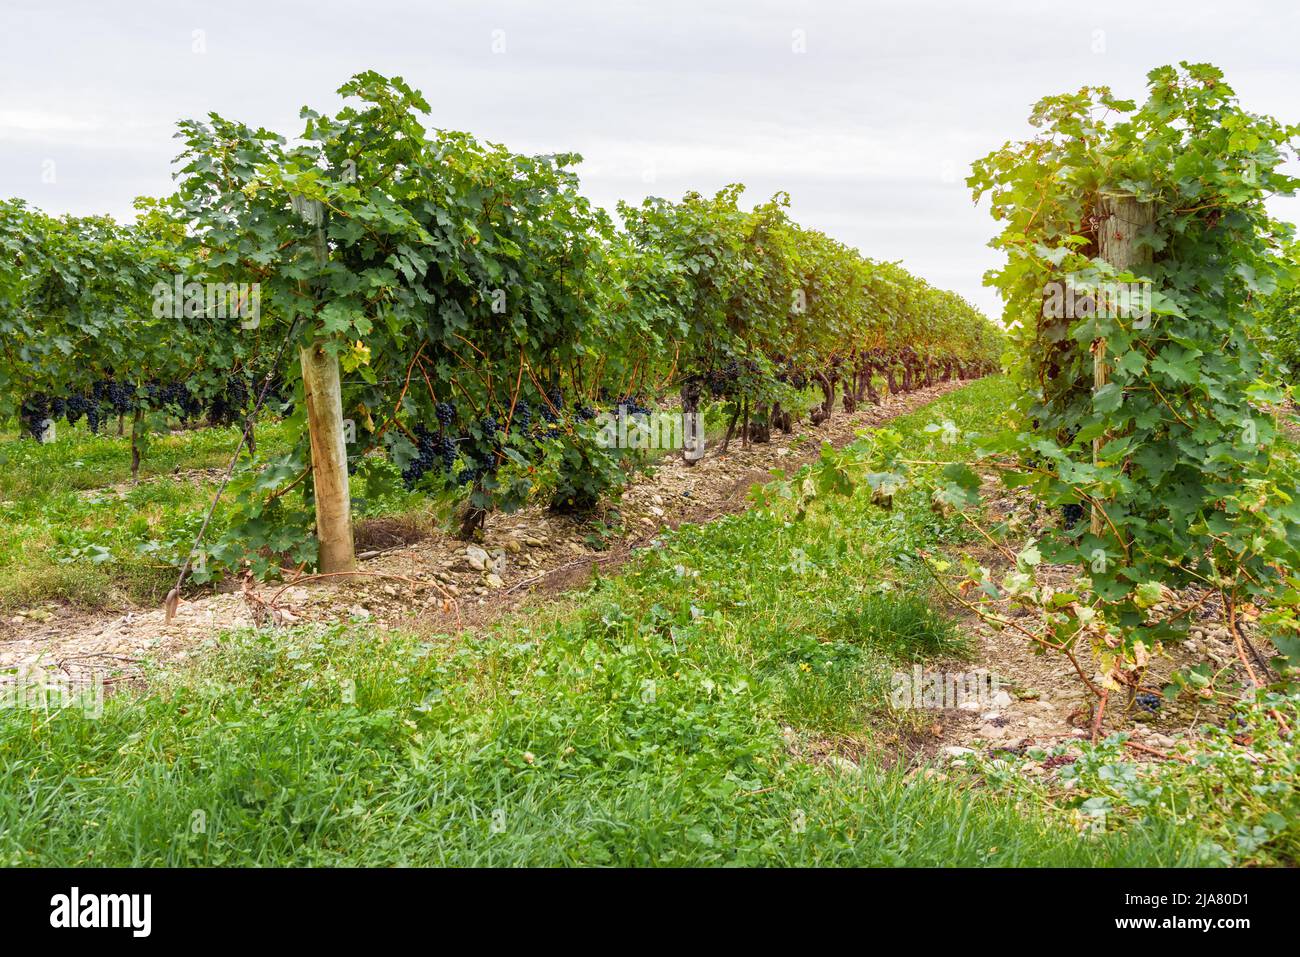 Grapes ready to be harvested in a vineyard on a cloudy autumn day Stock Photo